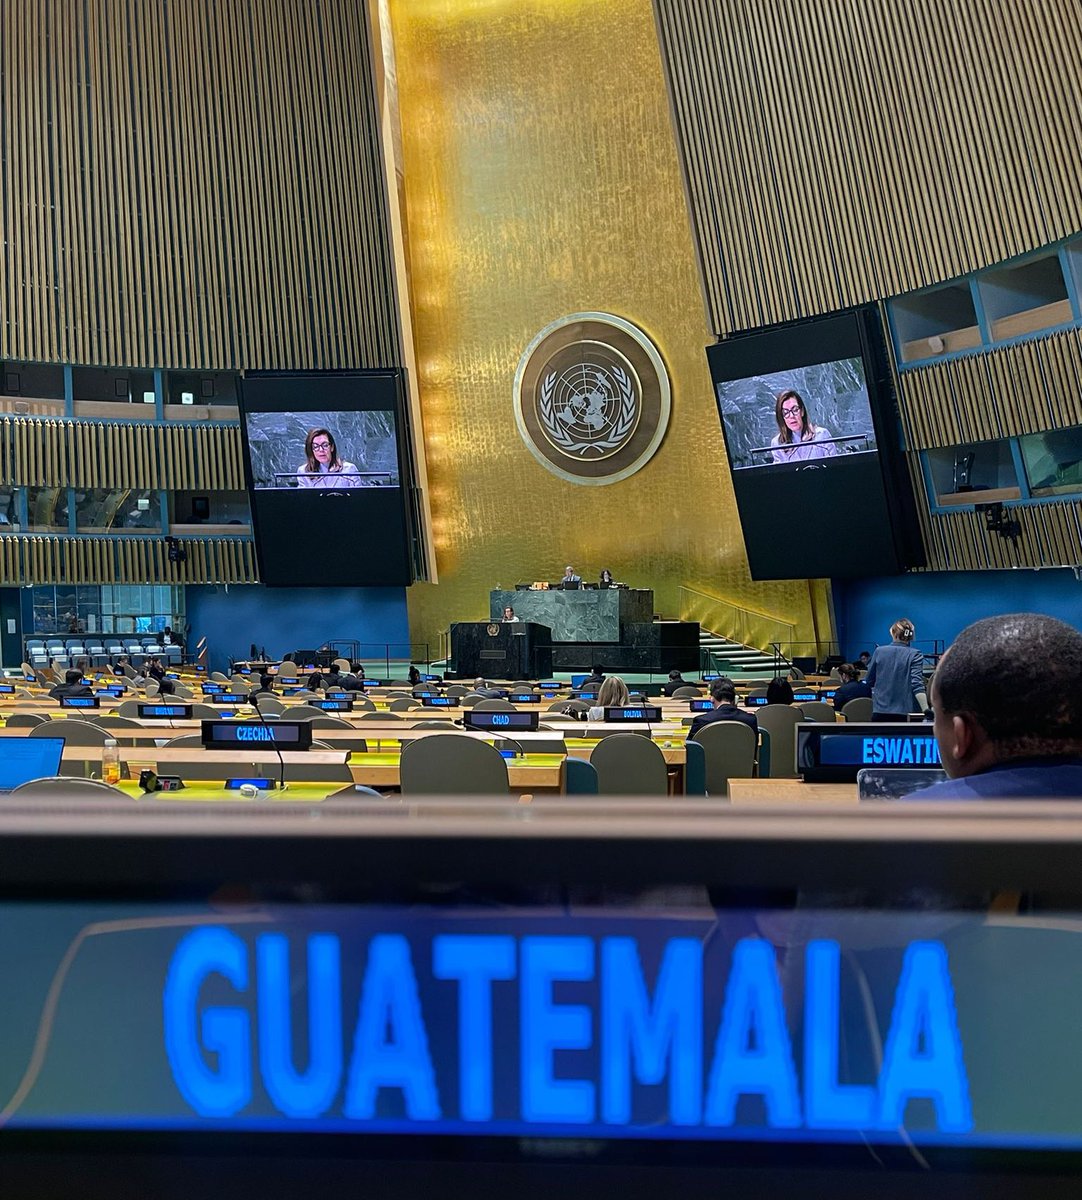 Guatemala, committed to international peace and security participated at the @UNGA debate to discuss the veto against the extension of the panel of experts monitoring DPRK’s UN Sanctions violations. This actions undermine the architecture of disarmament and non proliferation.